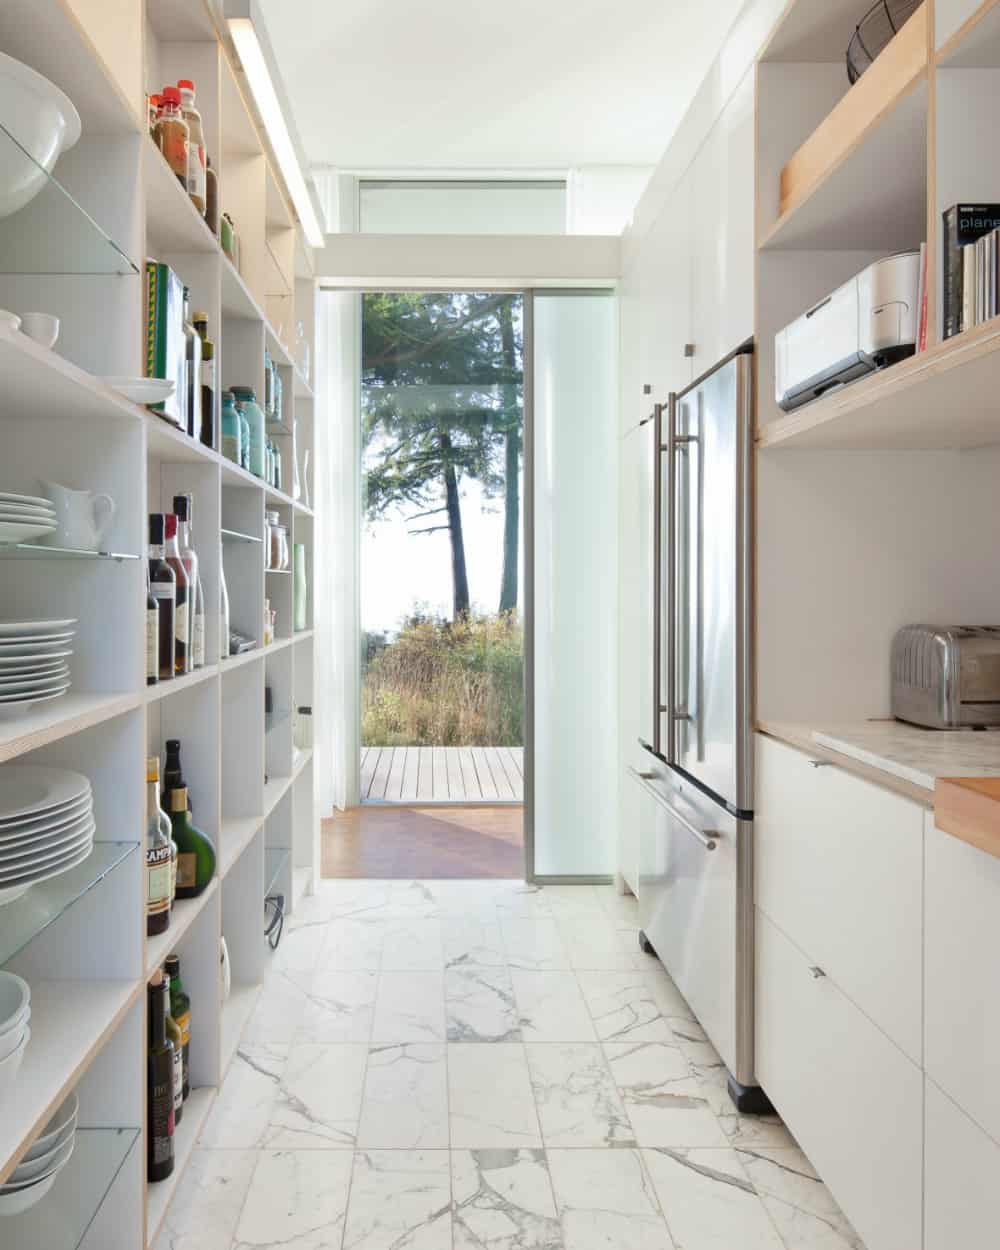 Breezy kitchen and pantry